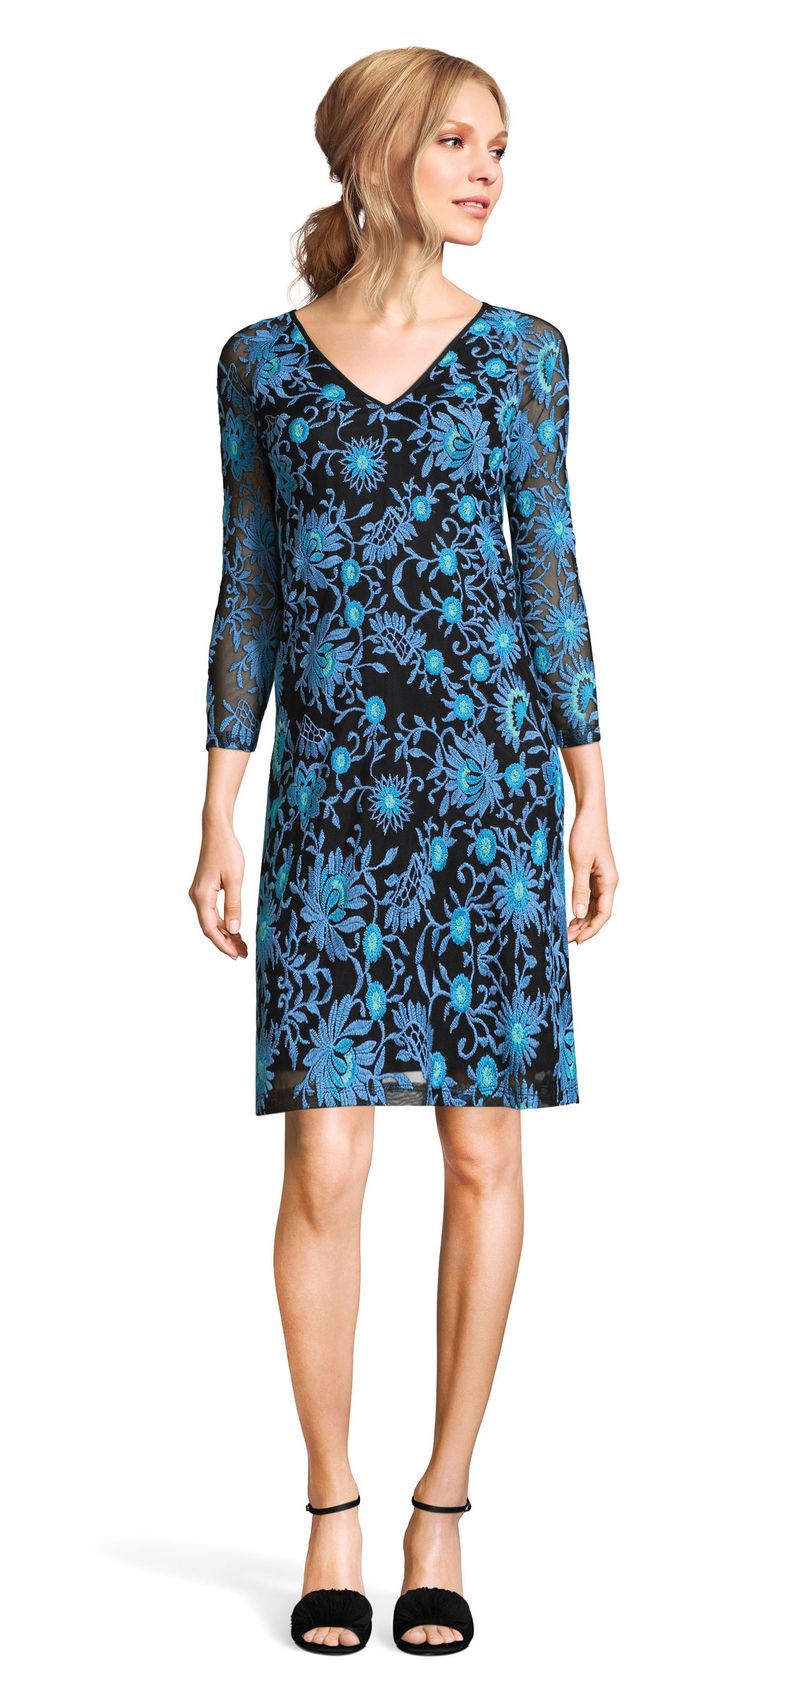 Adrianna Papell - AP1D100673 Embroidered Quarter Sleeve Sheath Dress In Blue